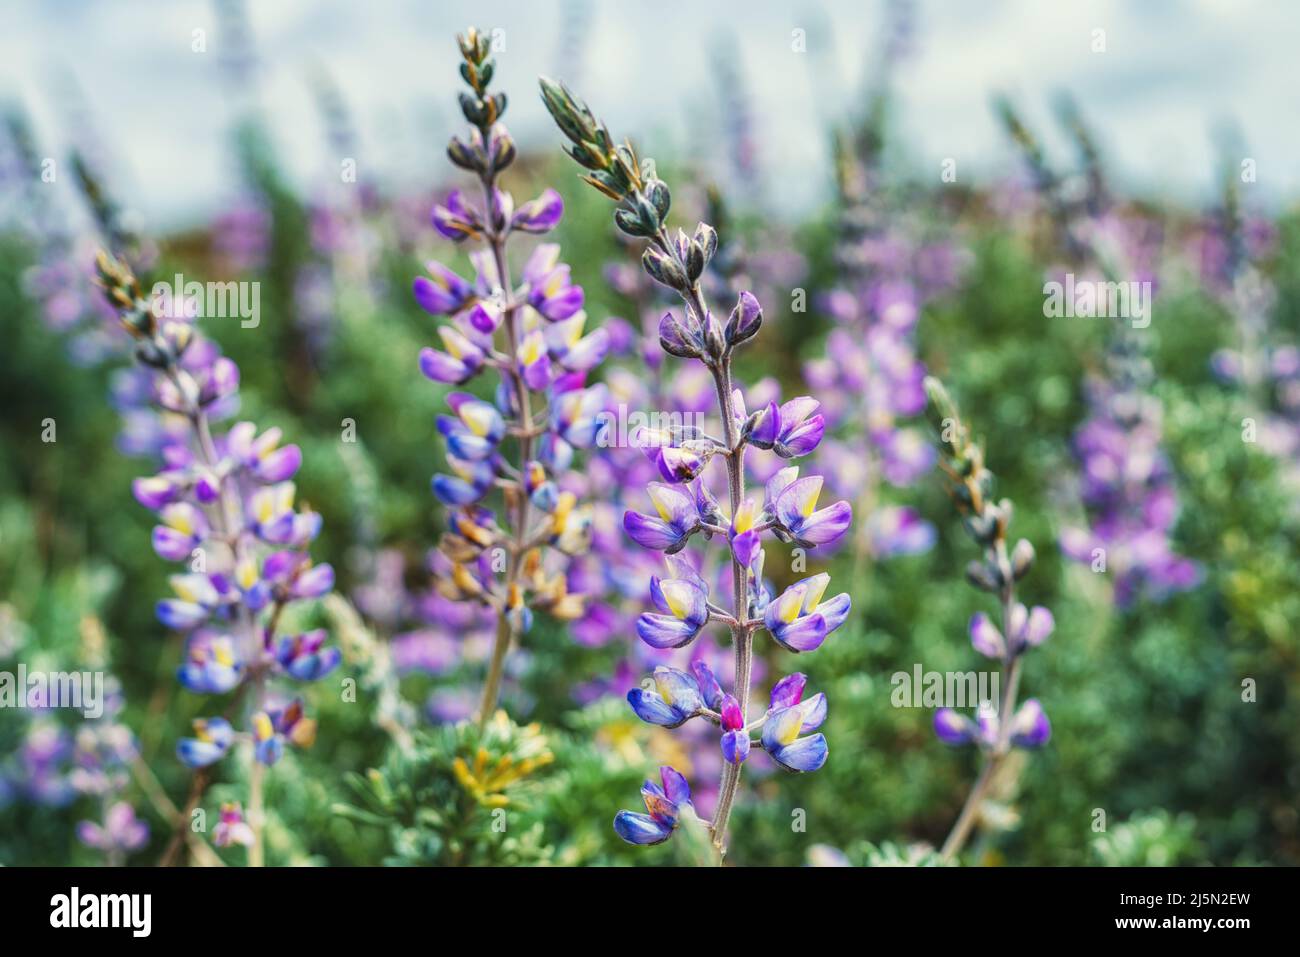 Silver Lupine close-up (Lupinus argenteus) in bloom, silvery-green leaves line the stems, and violet, pea-like flowers are arranged in a showy spike. Stock Photo